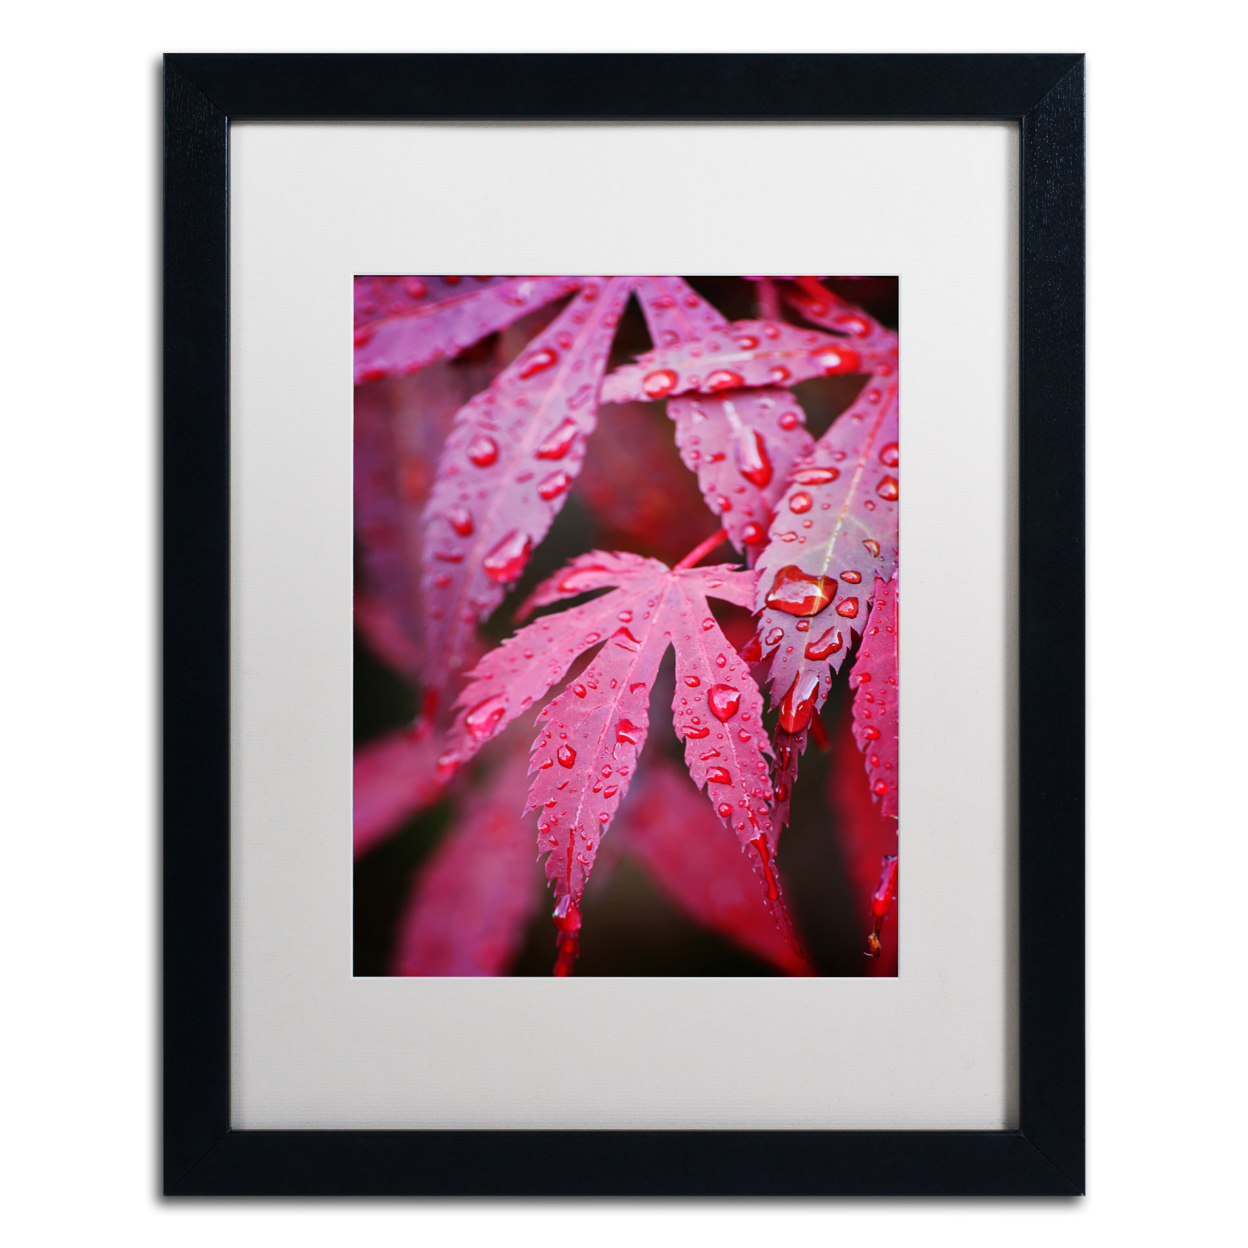 Philippe Sainte-Laudy 'Red Maple Leaves' Black Wooden Framed Art 18 X 22 Inches